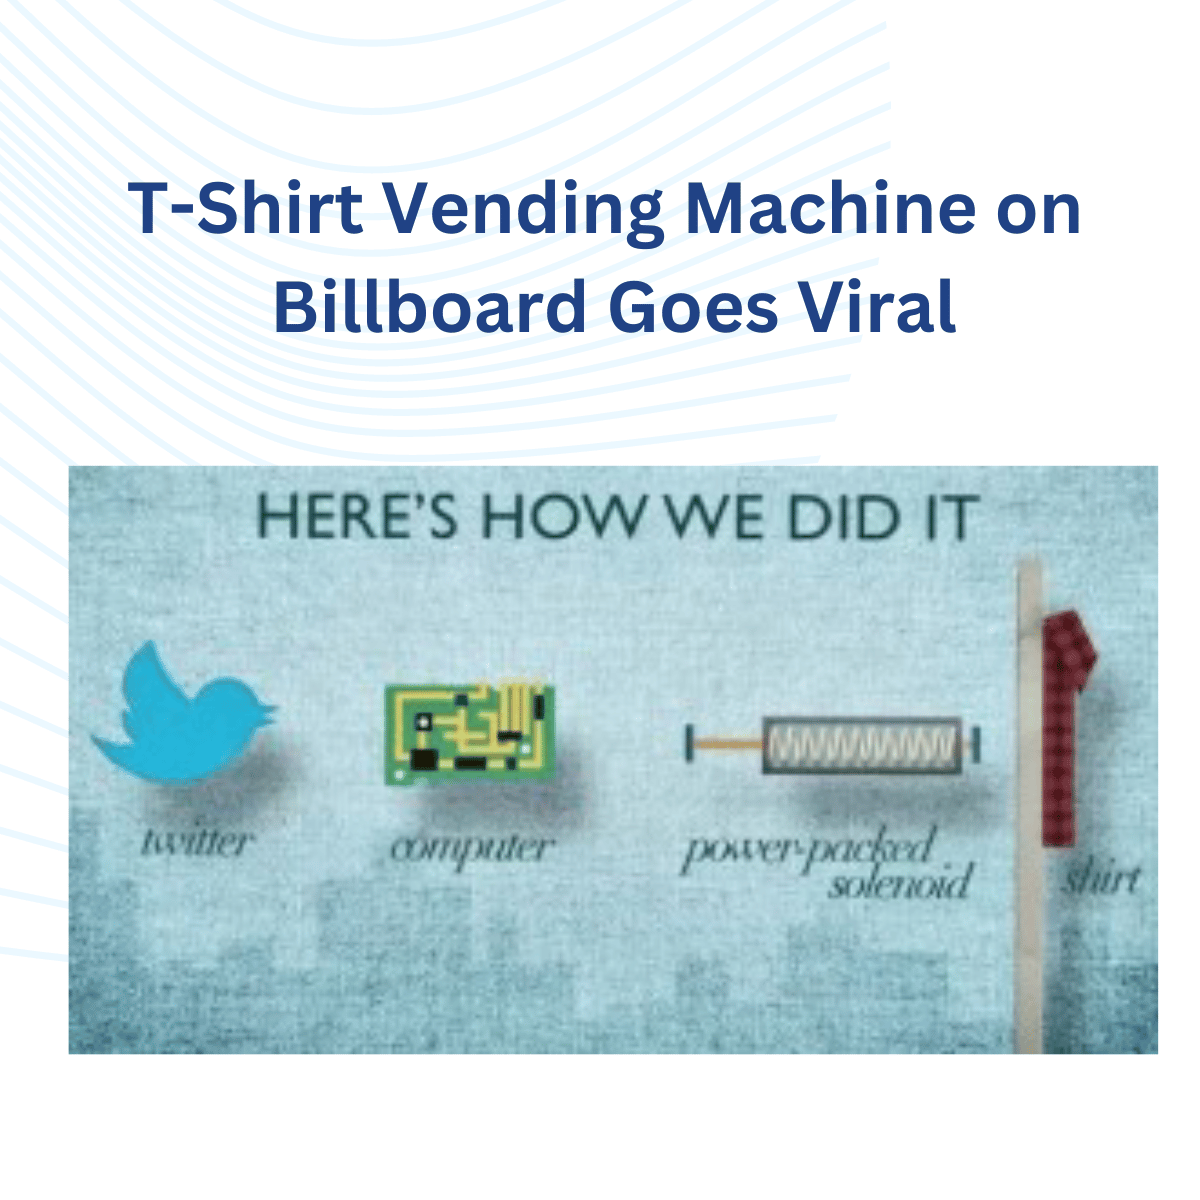 VENDING IN THE NEWS: T-SHIRTS FROM A BILLBOARD VENDING MACHINE?